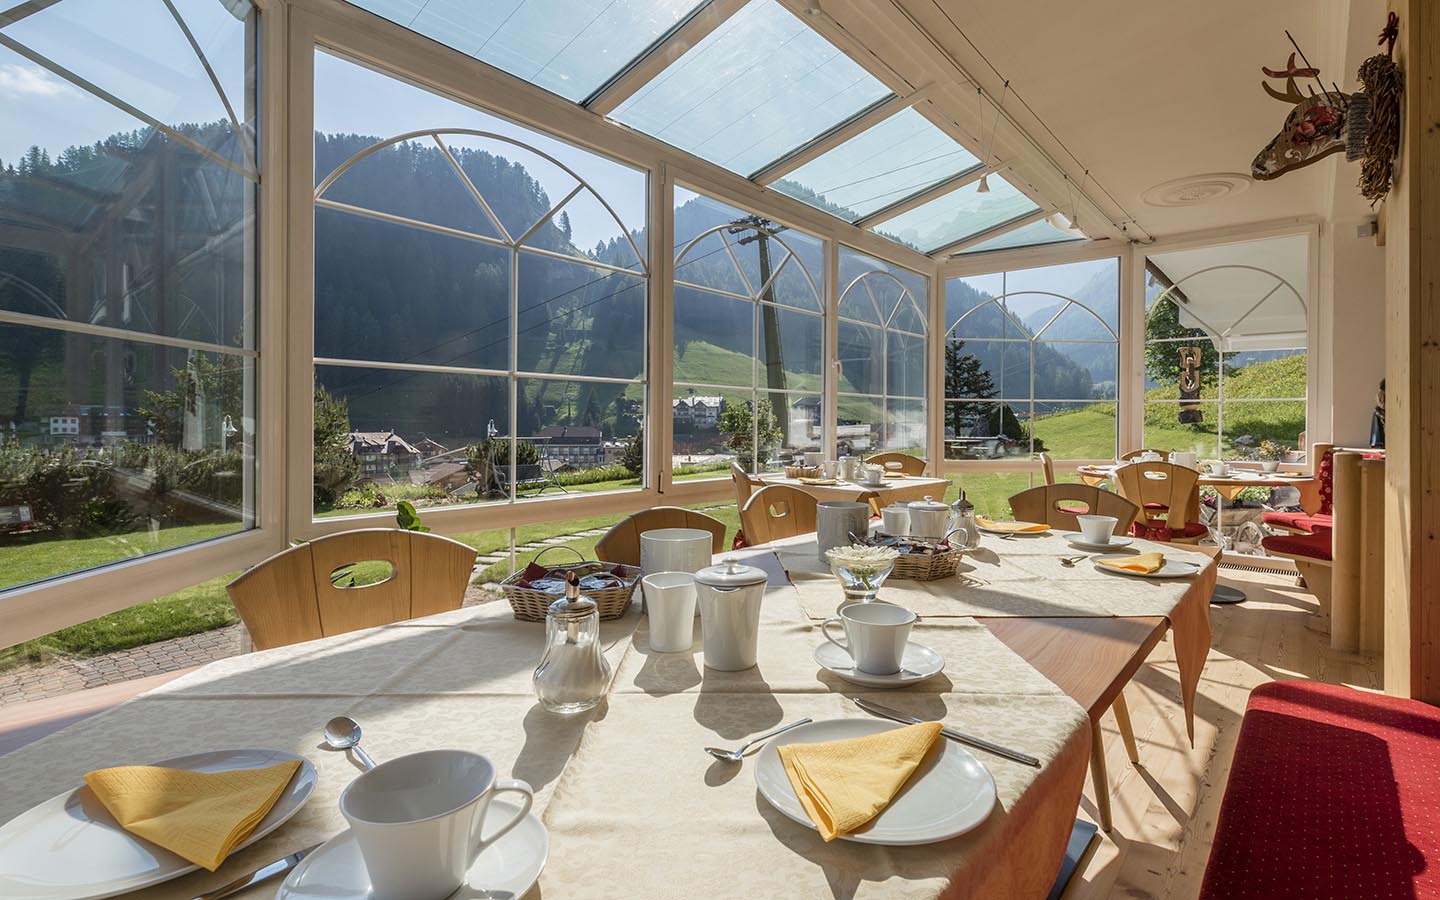 Breakfastroom with panoramic view